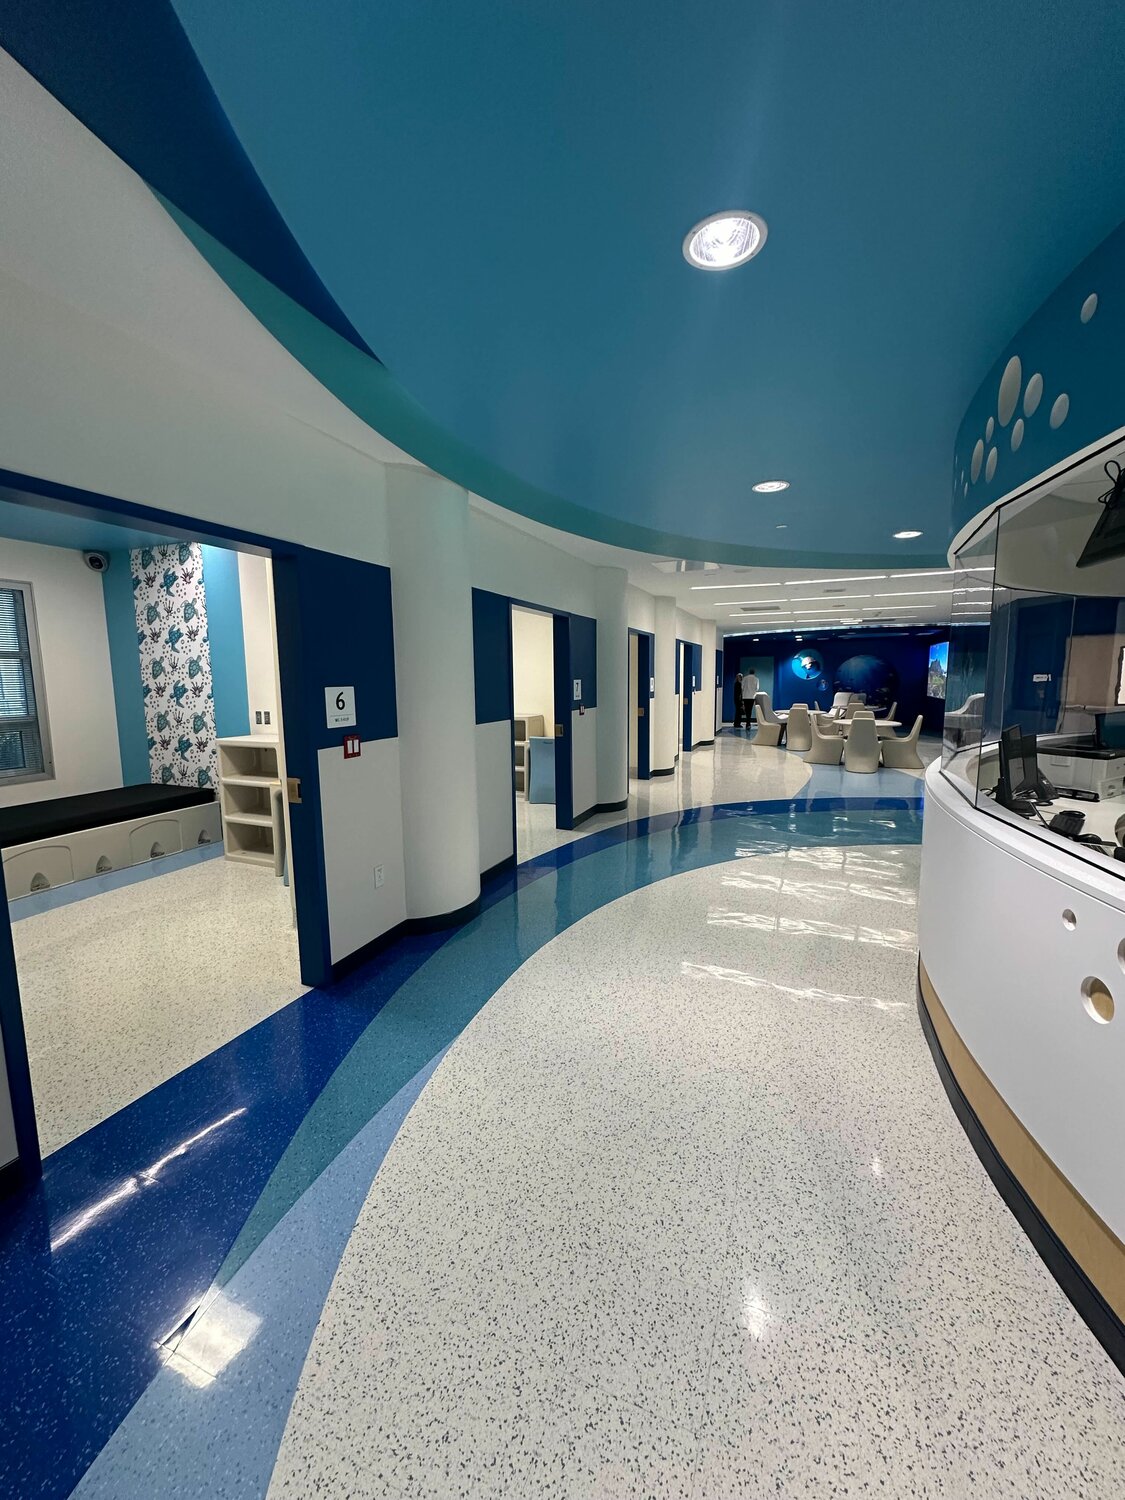 The Behavioral Health and Wellness Unit at Wolfson Children's Hospital